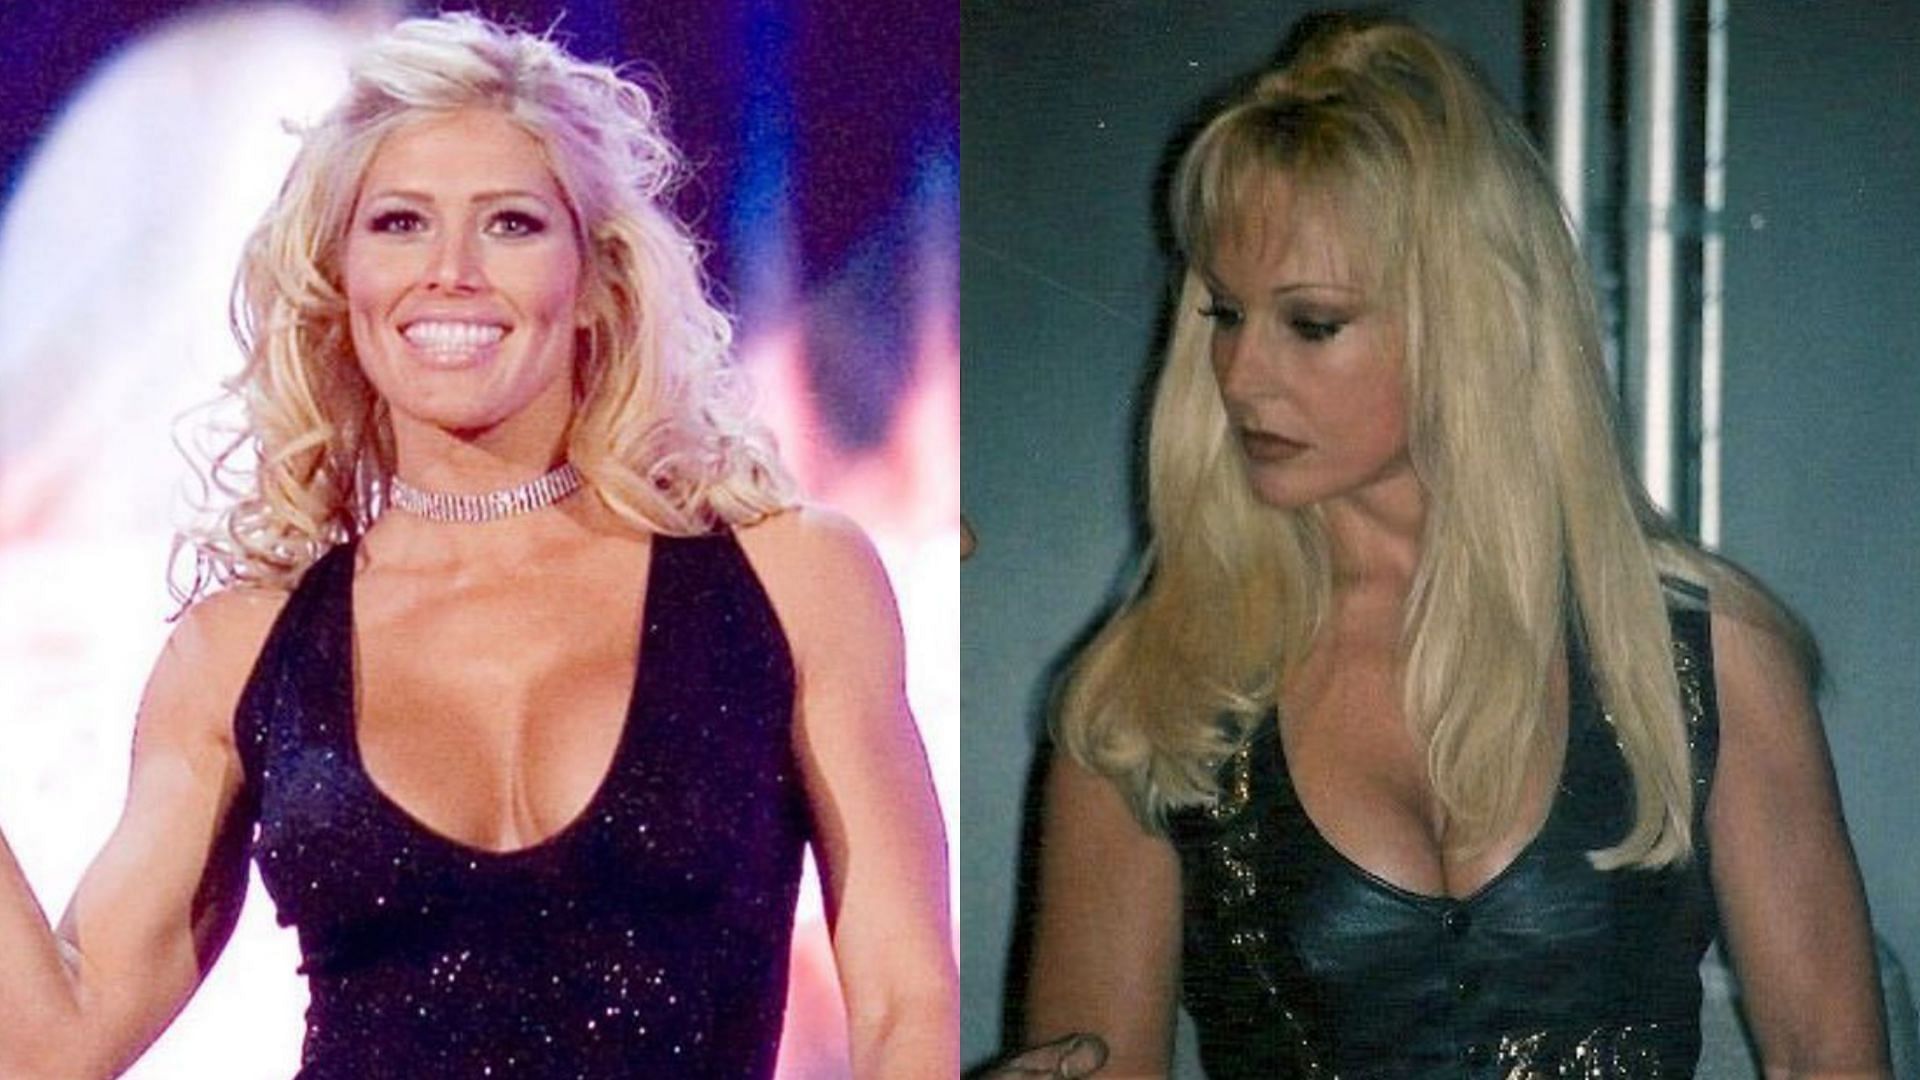 Torrie Wilson and Debra had an altercation backstage